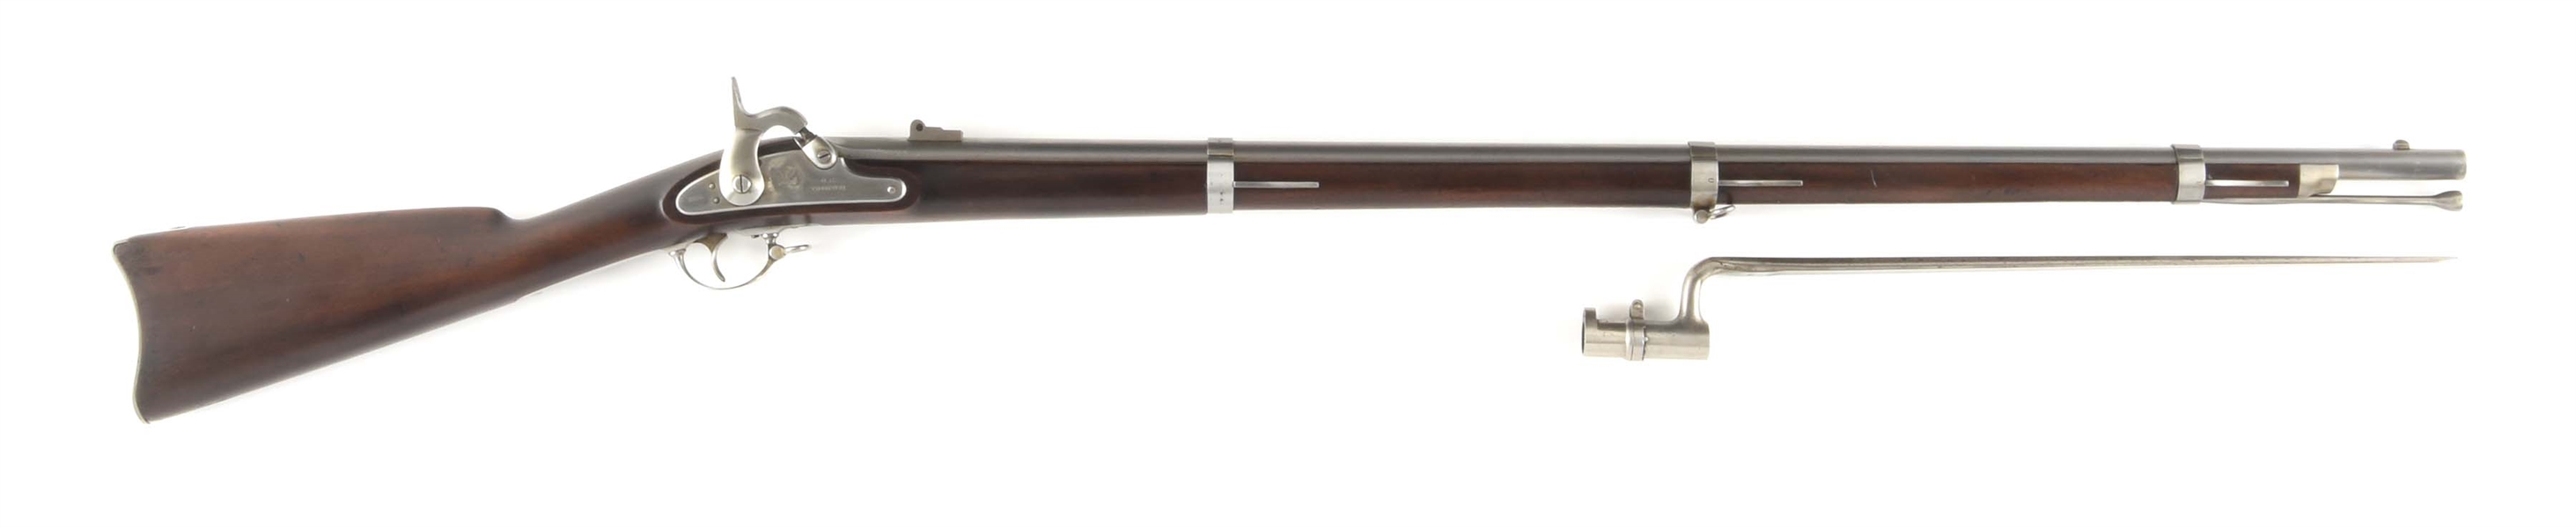 (A) 1864 U.S. TRENTON PERCUSSION MUSKET WITH BAYONET.